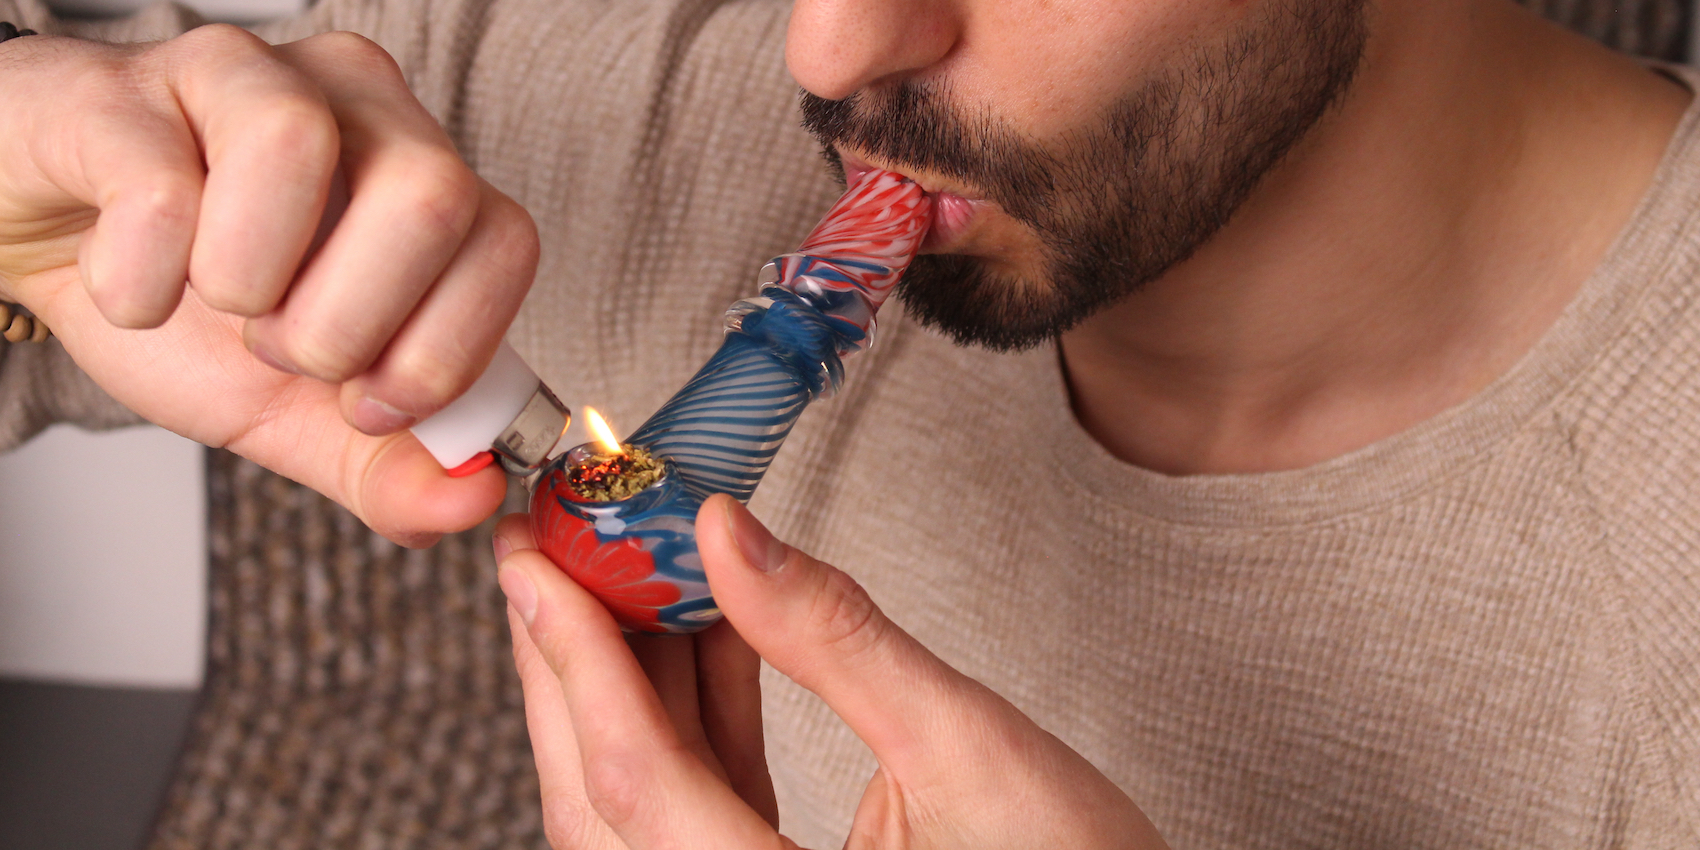 Man smoking cannabis from a clean pipe